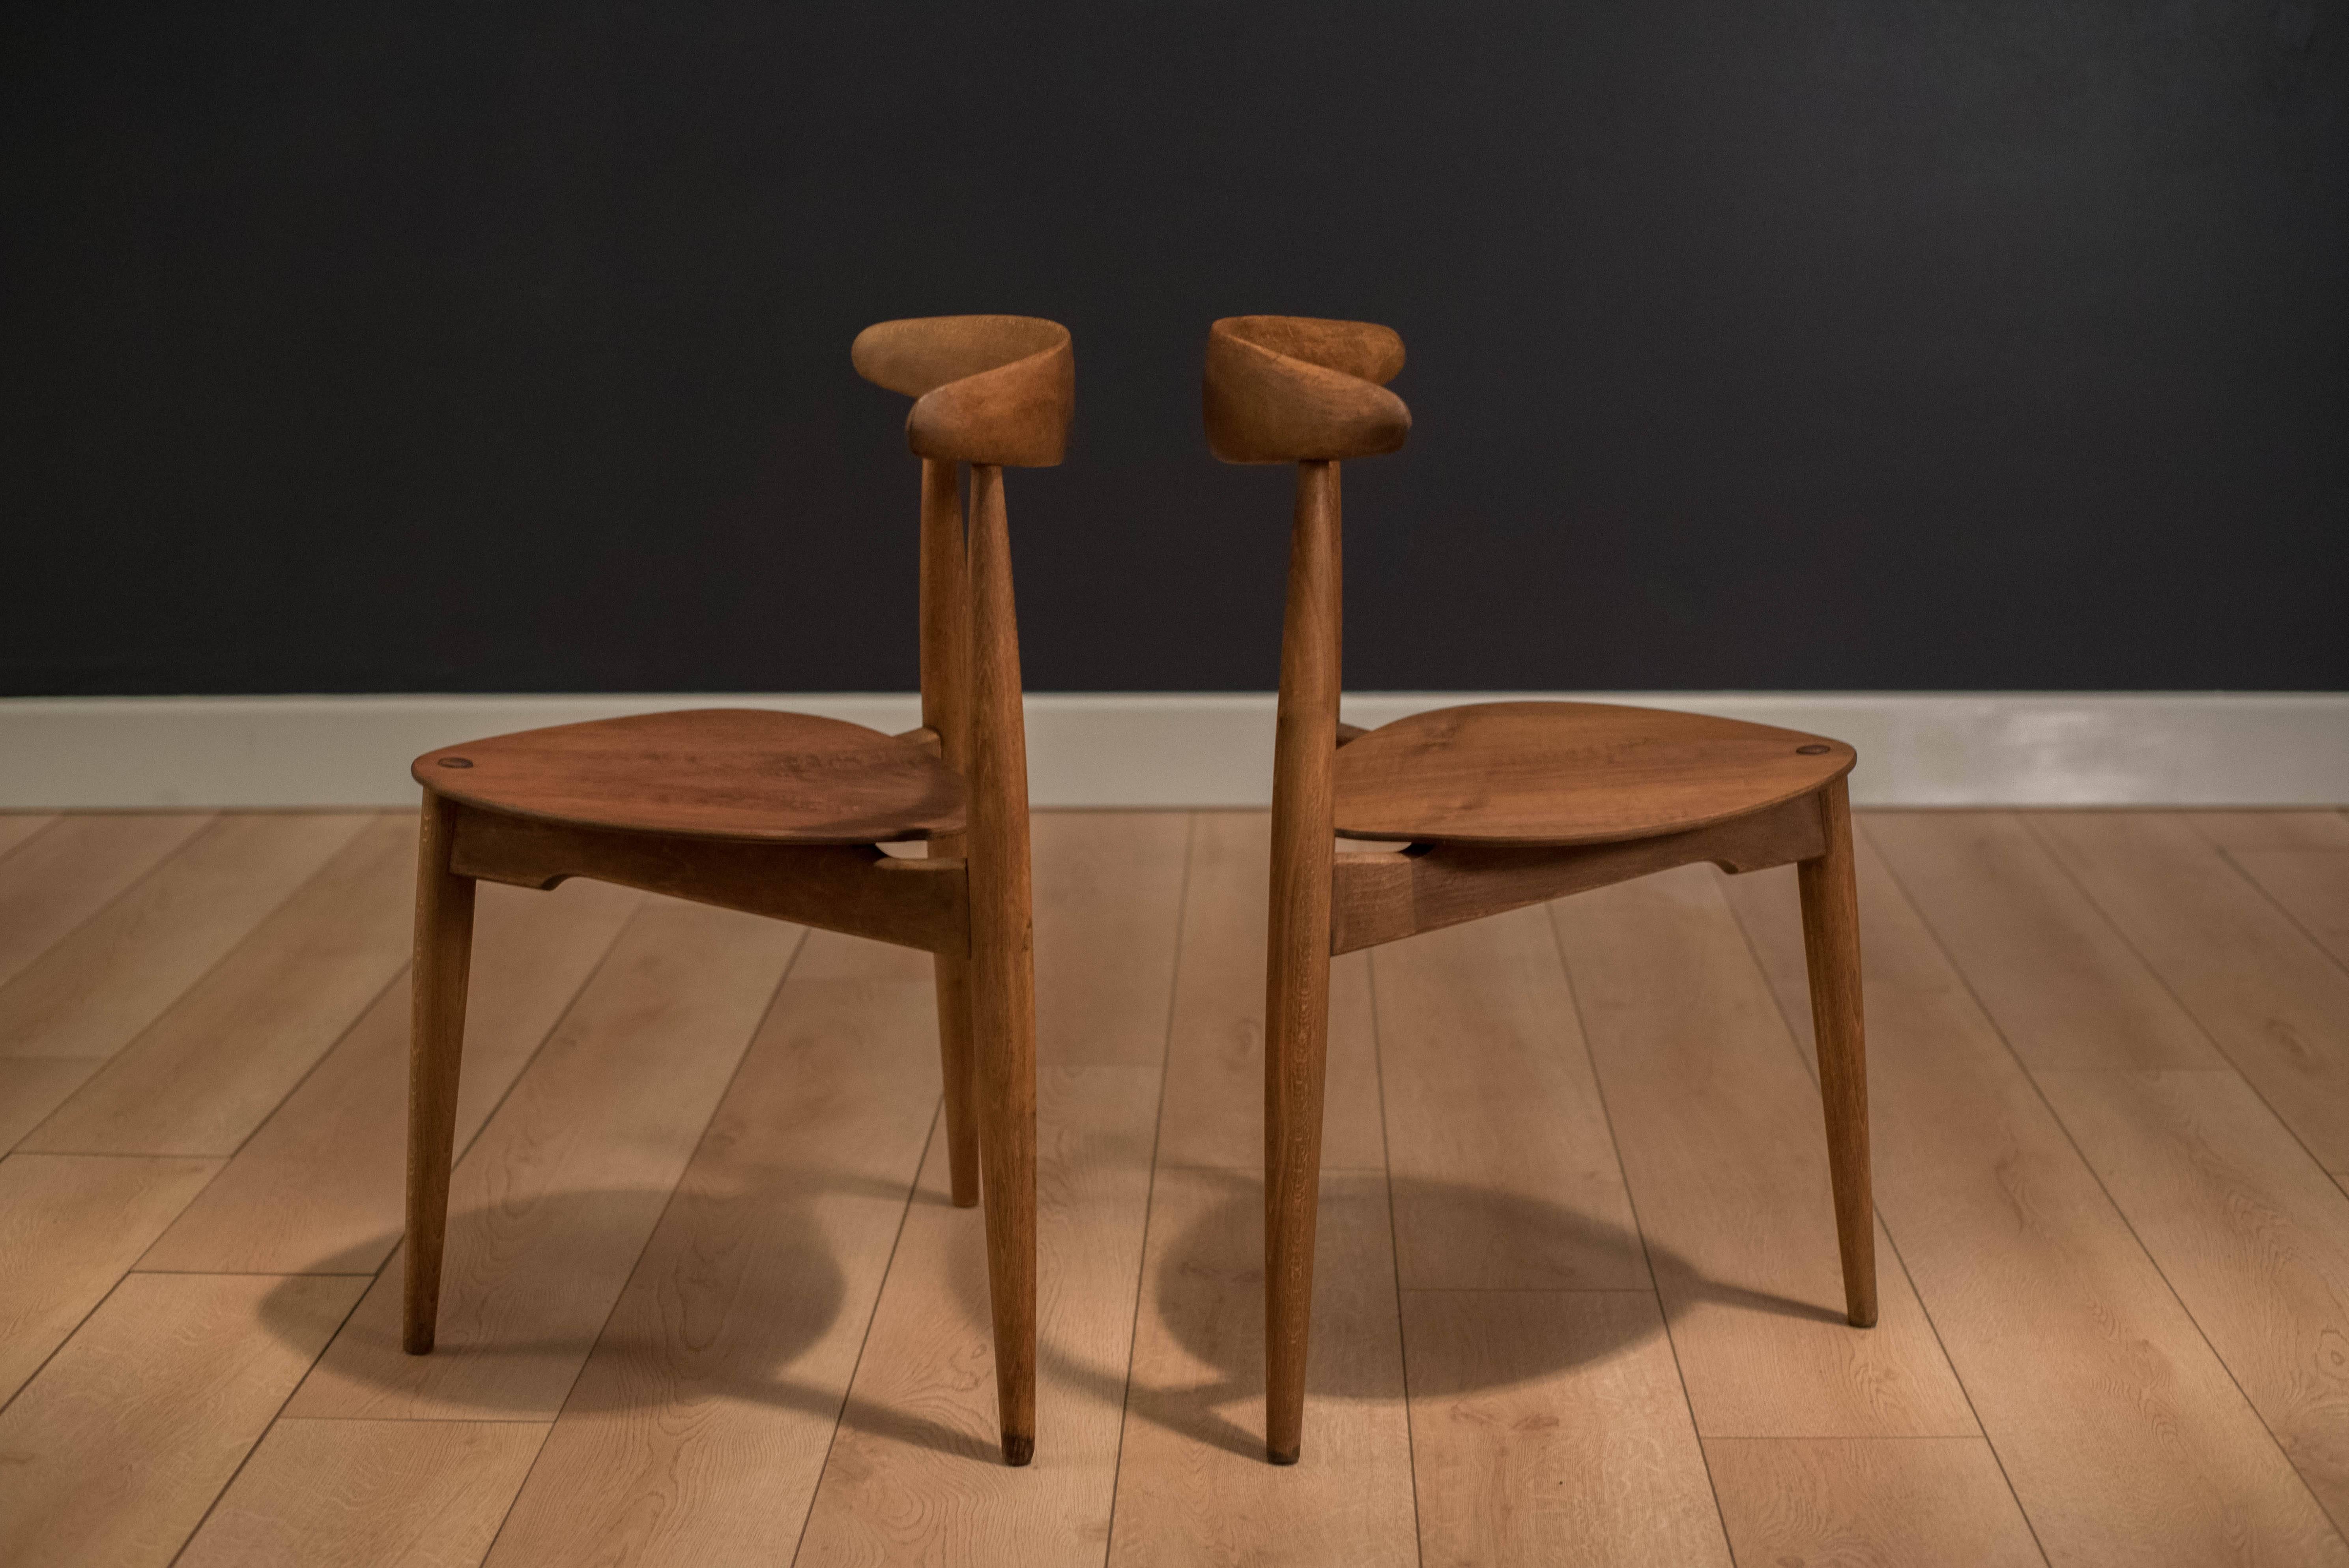 Mid-Century heart chairs designed by Hans J. Wegner for Fritz Hansen model FH 4013. This piece is constructed of teak and beechwood. Imported by Raymor. Price is for the pair. 

